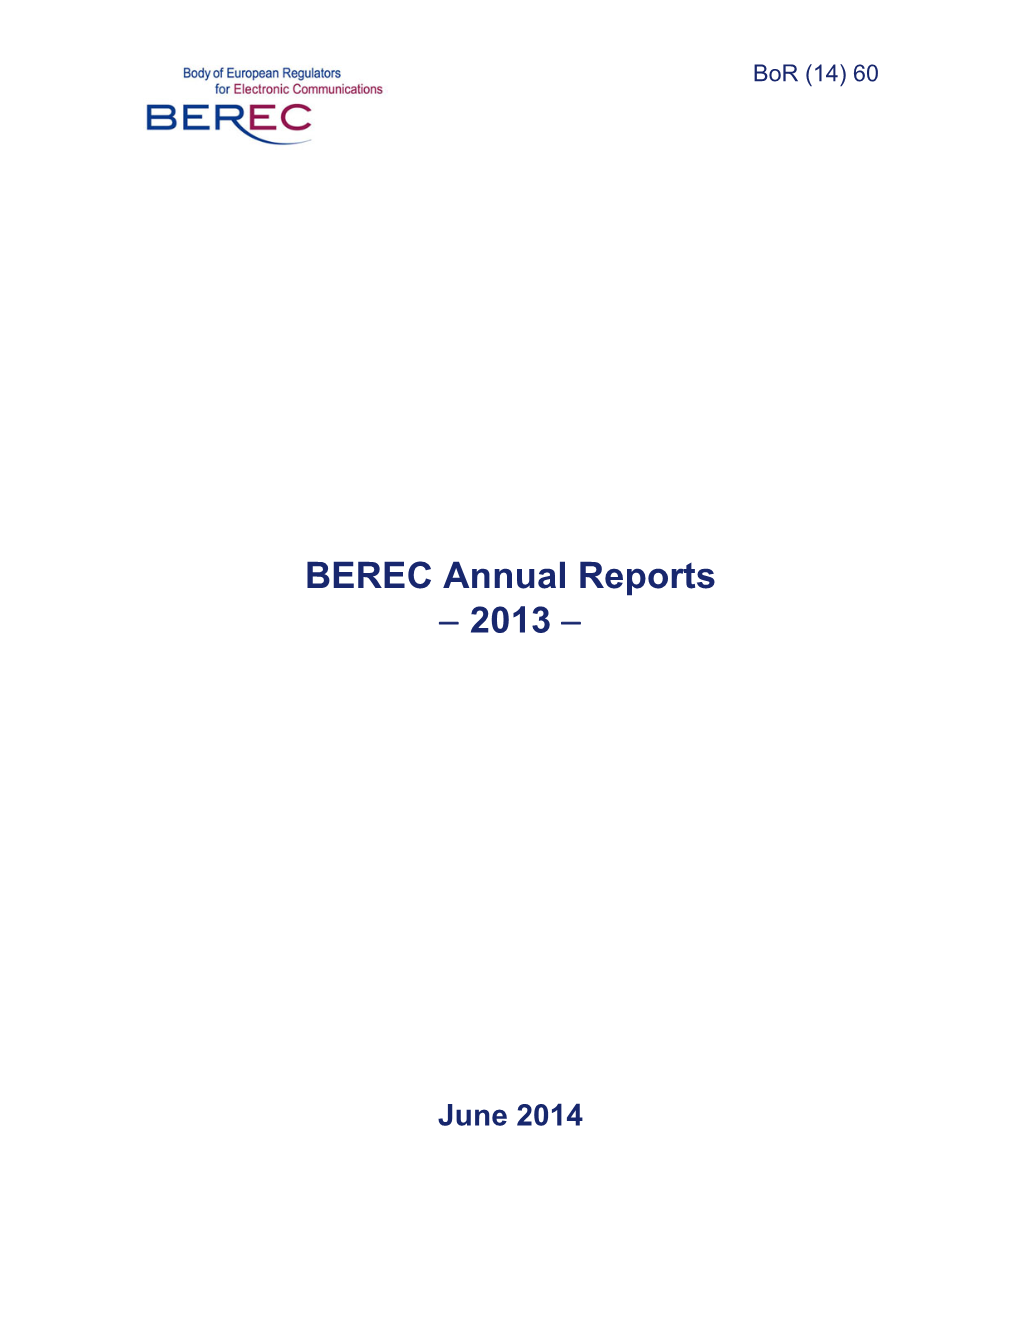 BEREC Annual Reports for 2013